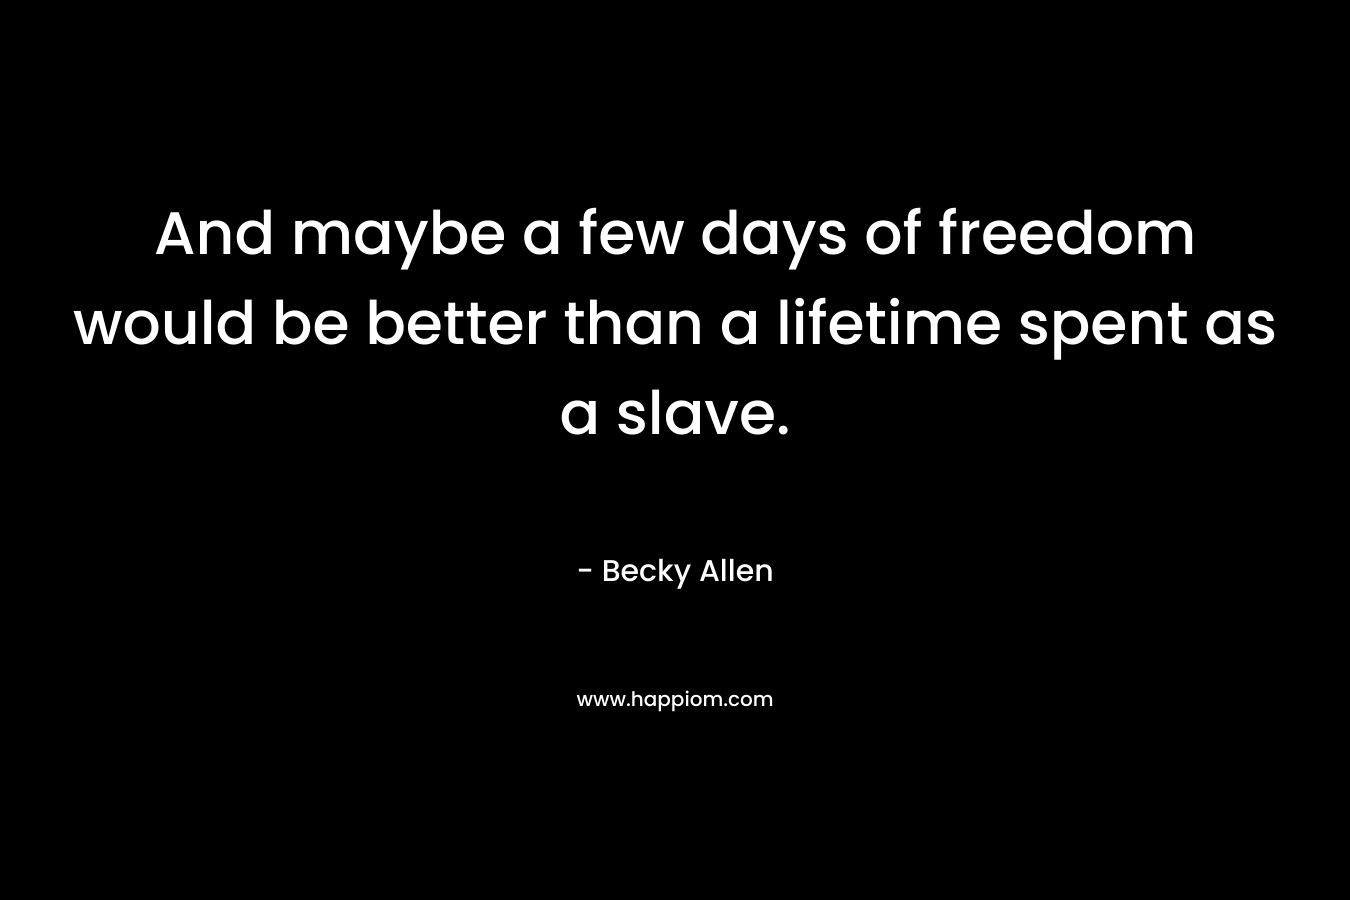 And maybe a few days of freedom would be better than a lifetime spent as a slave.